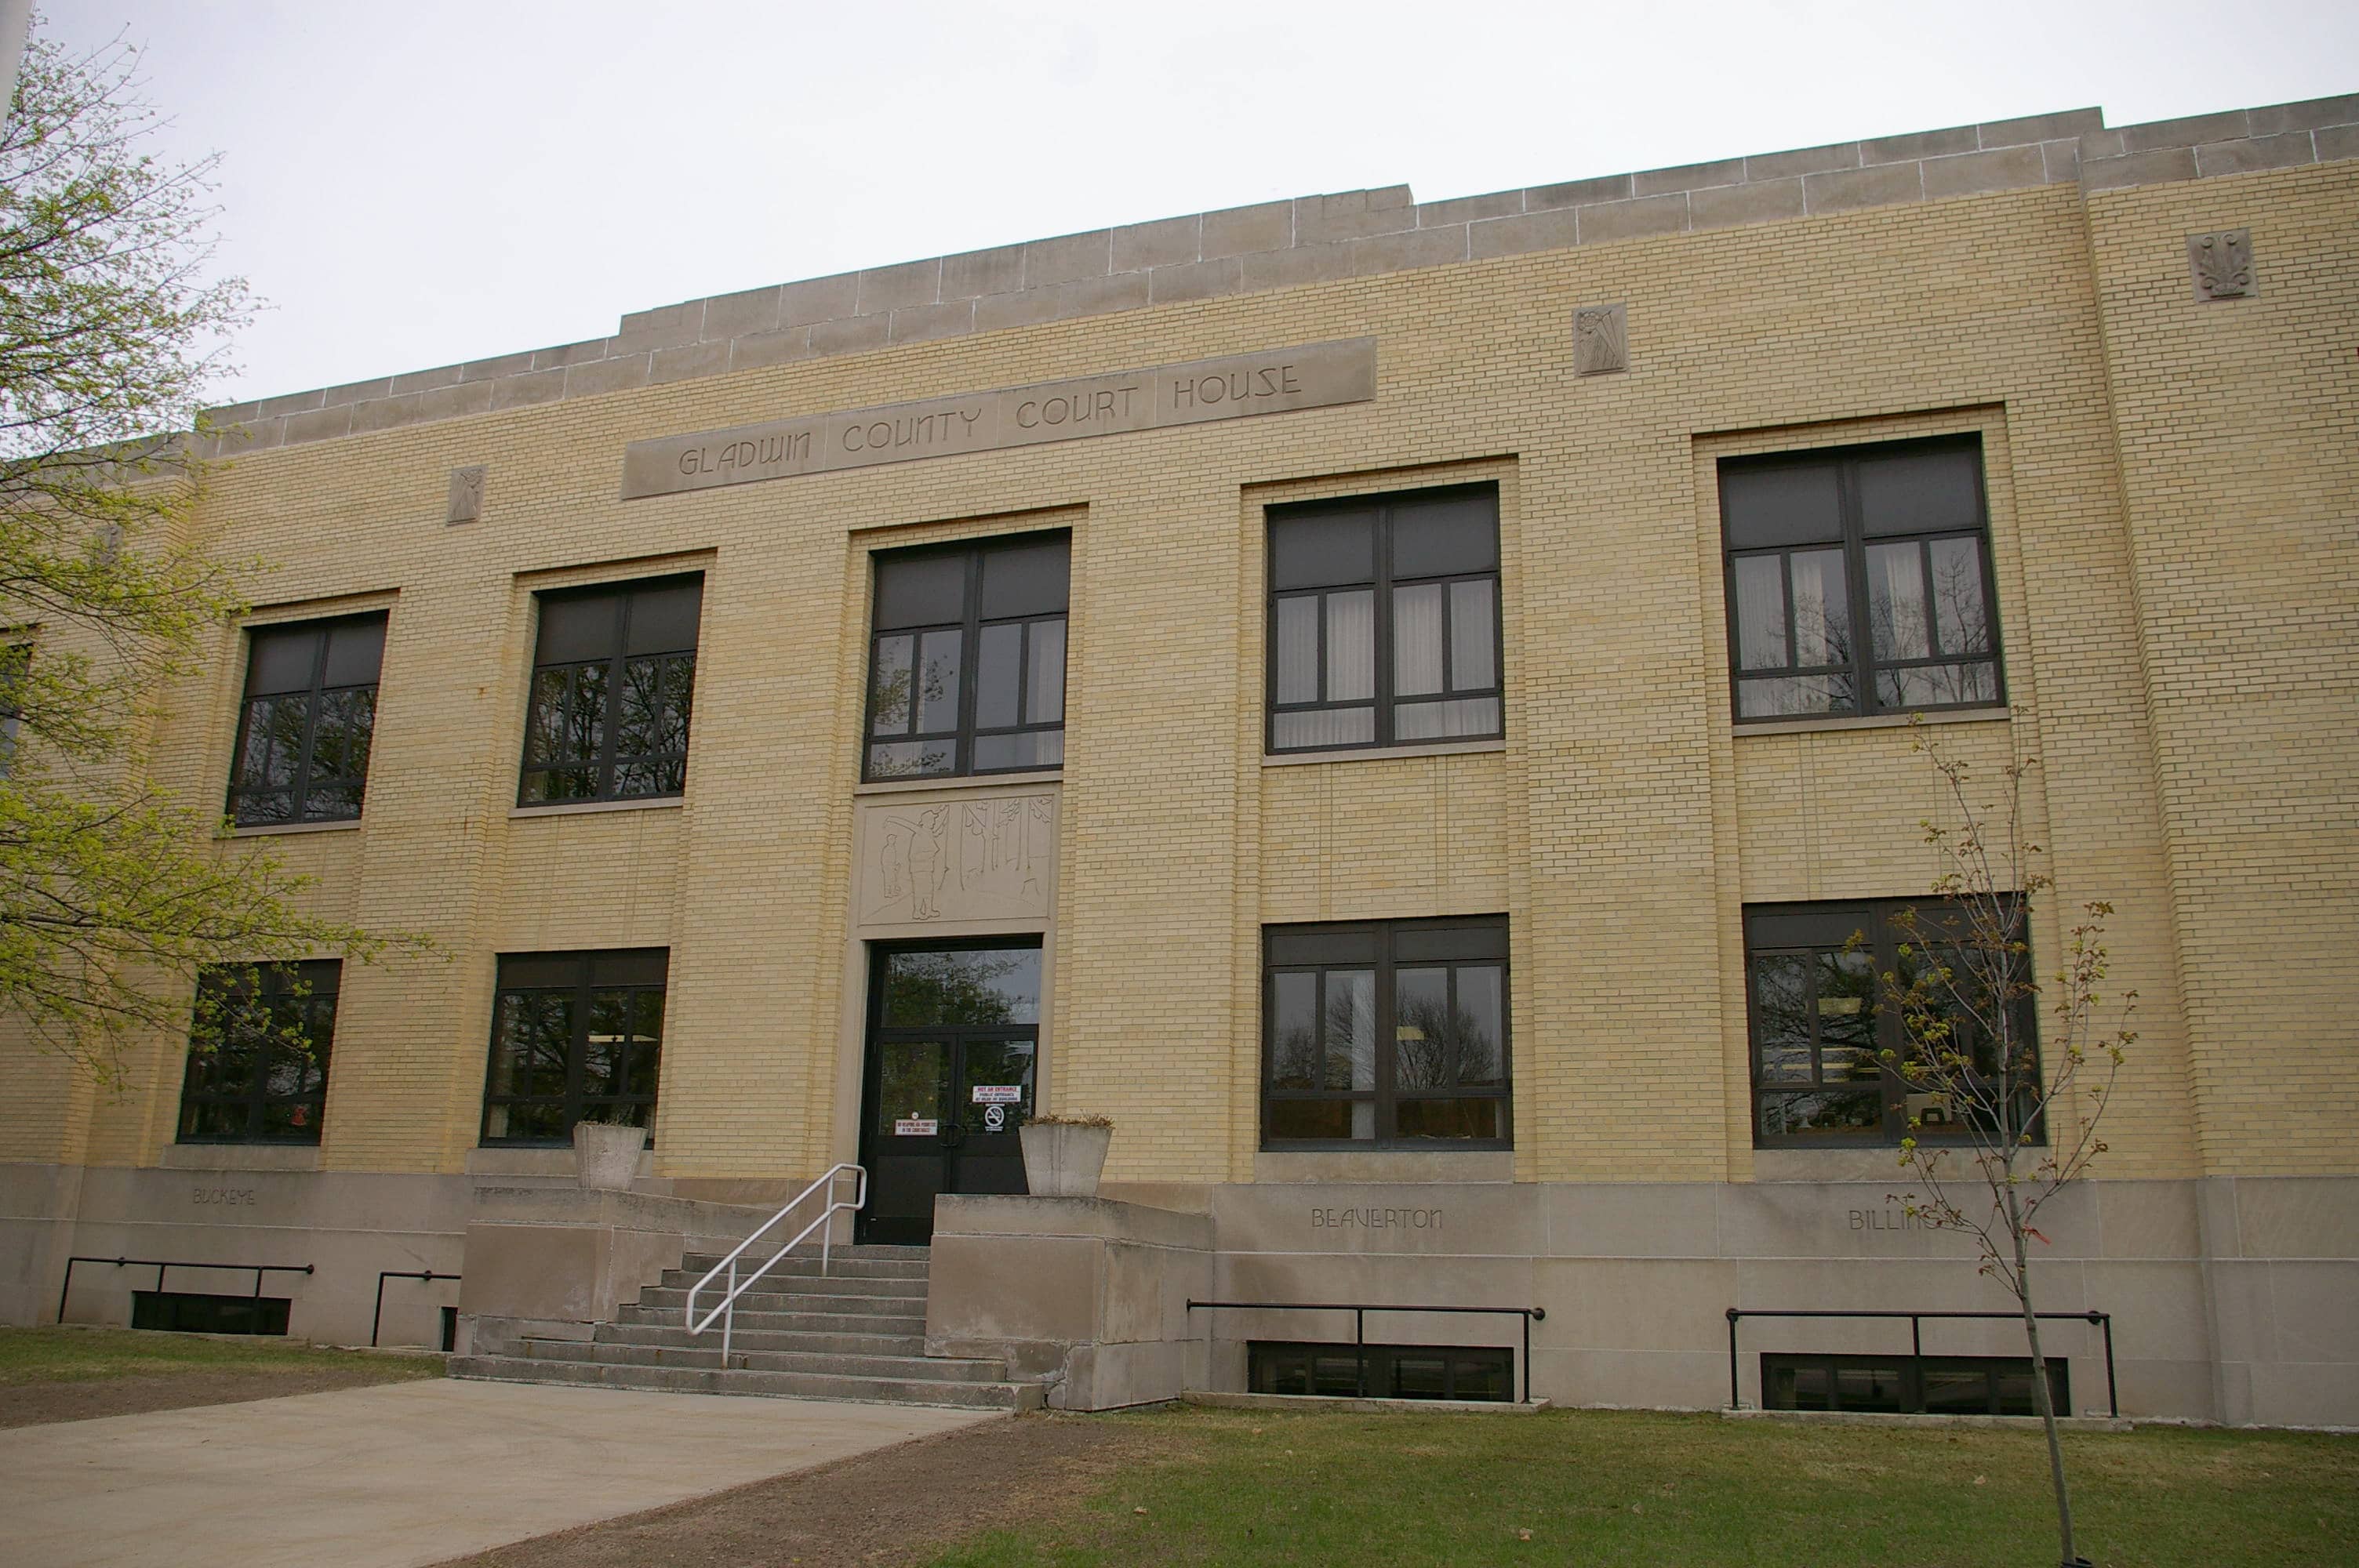 Image of Gladwin County court